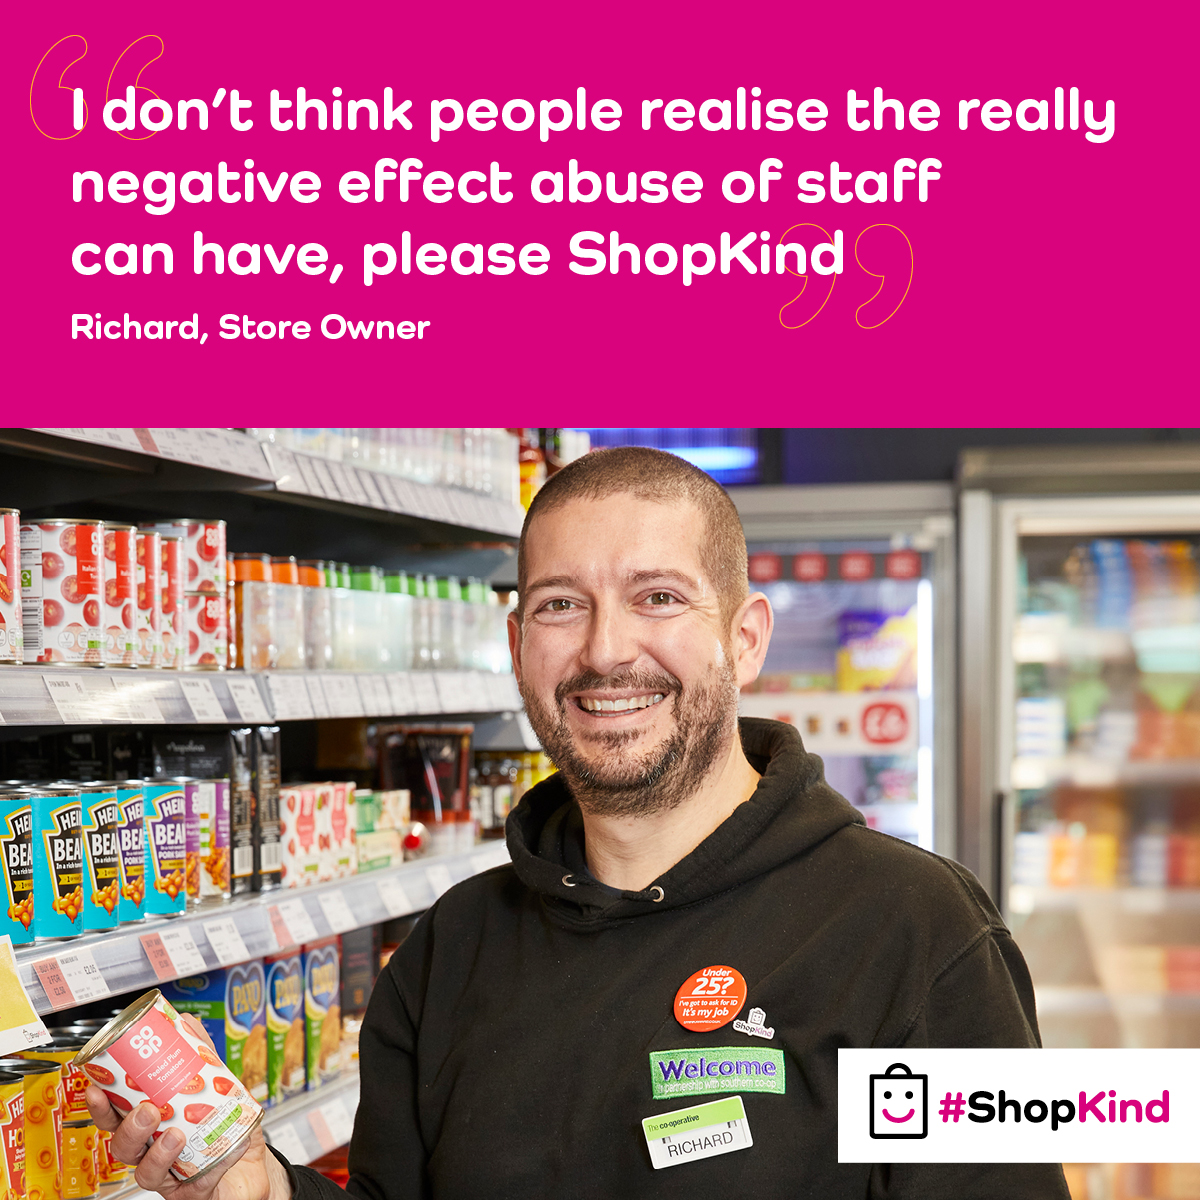 Shopworkers are keyworkers. If you’re out shopping over the festive period, please remember to #ShopKind